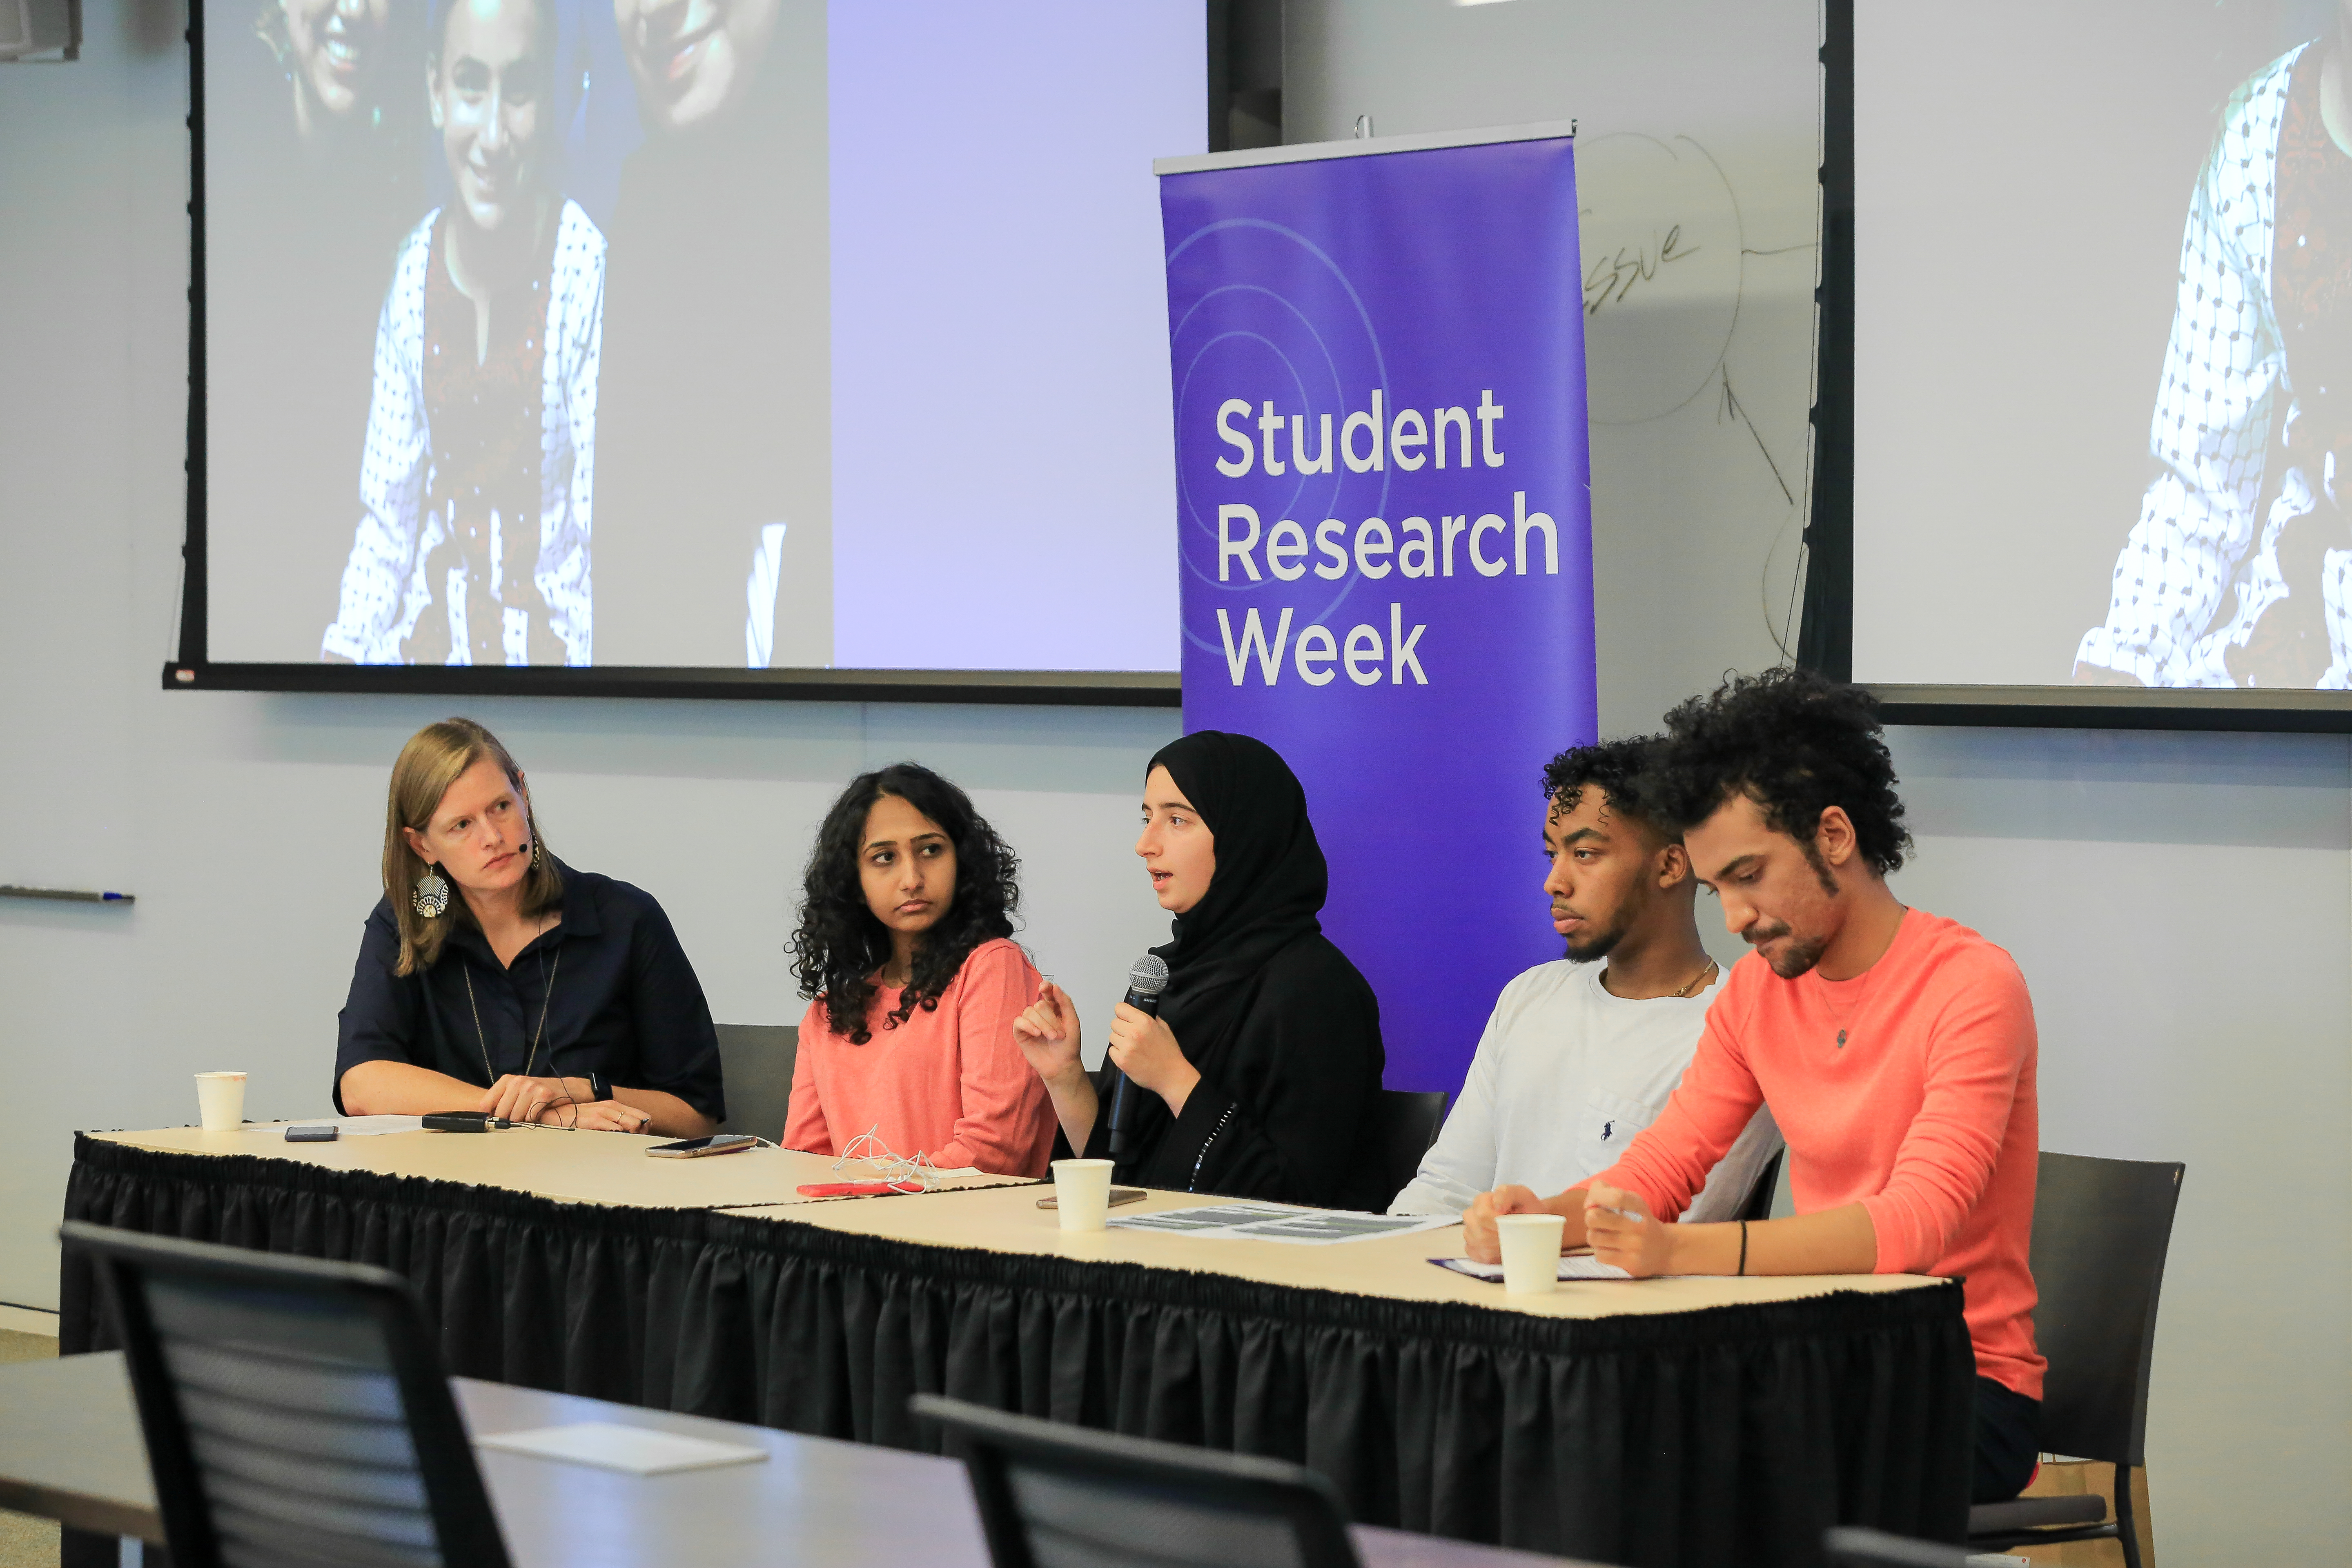 NU-Q students presenting their research in a moderated discussion during a community event